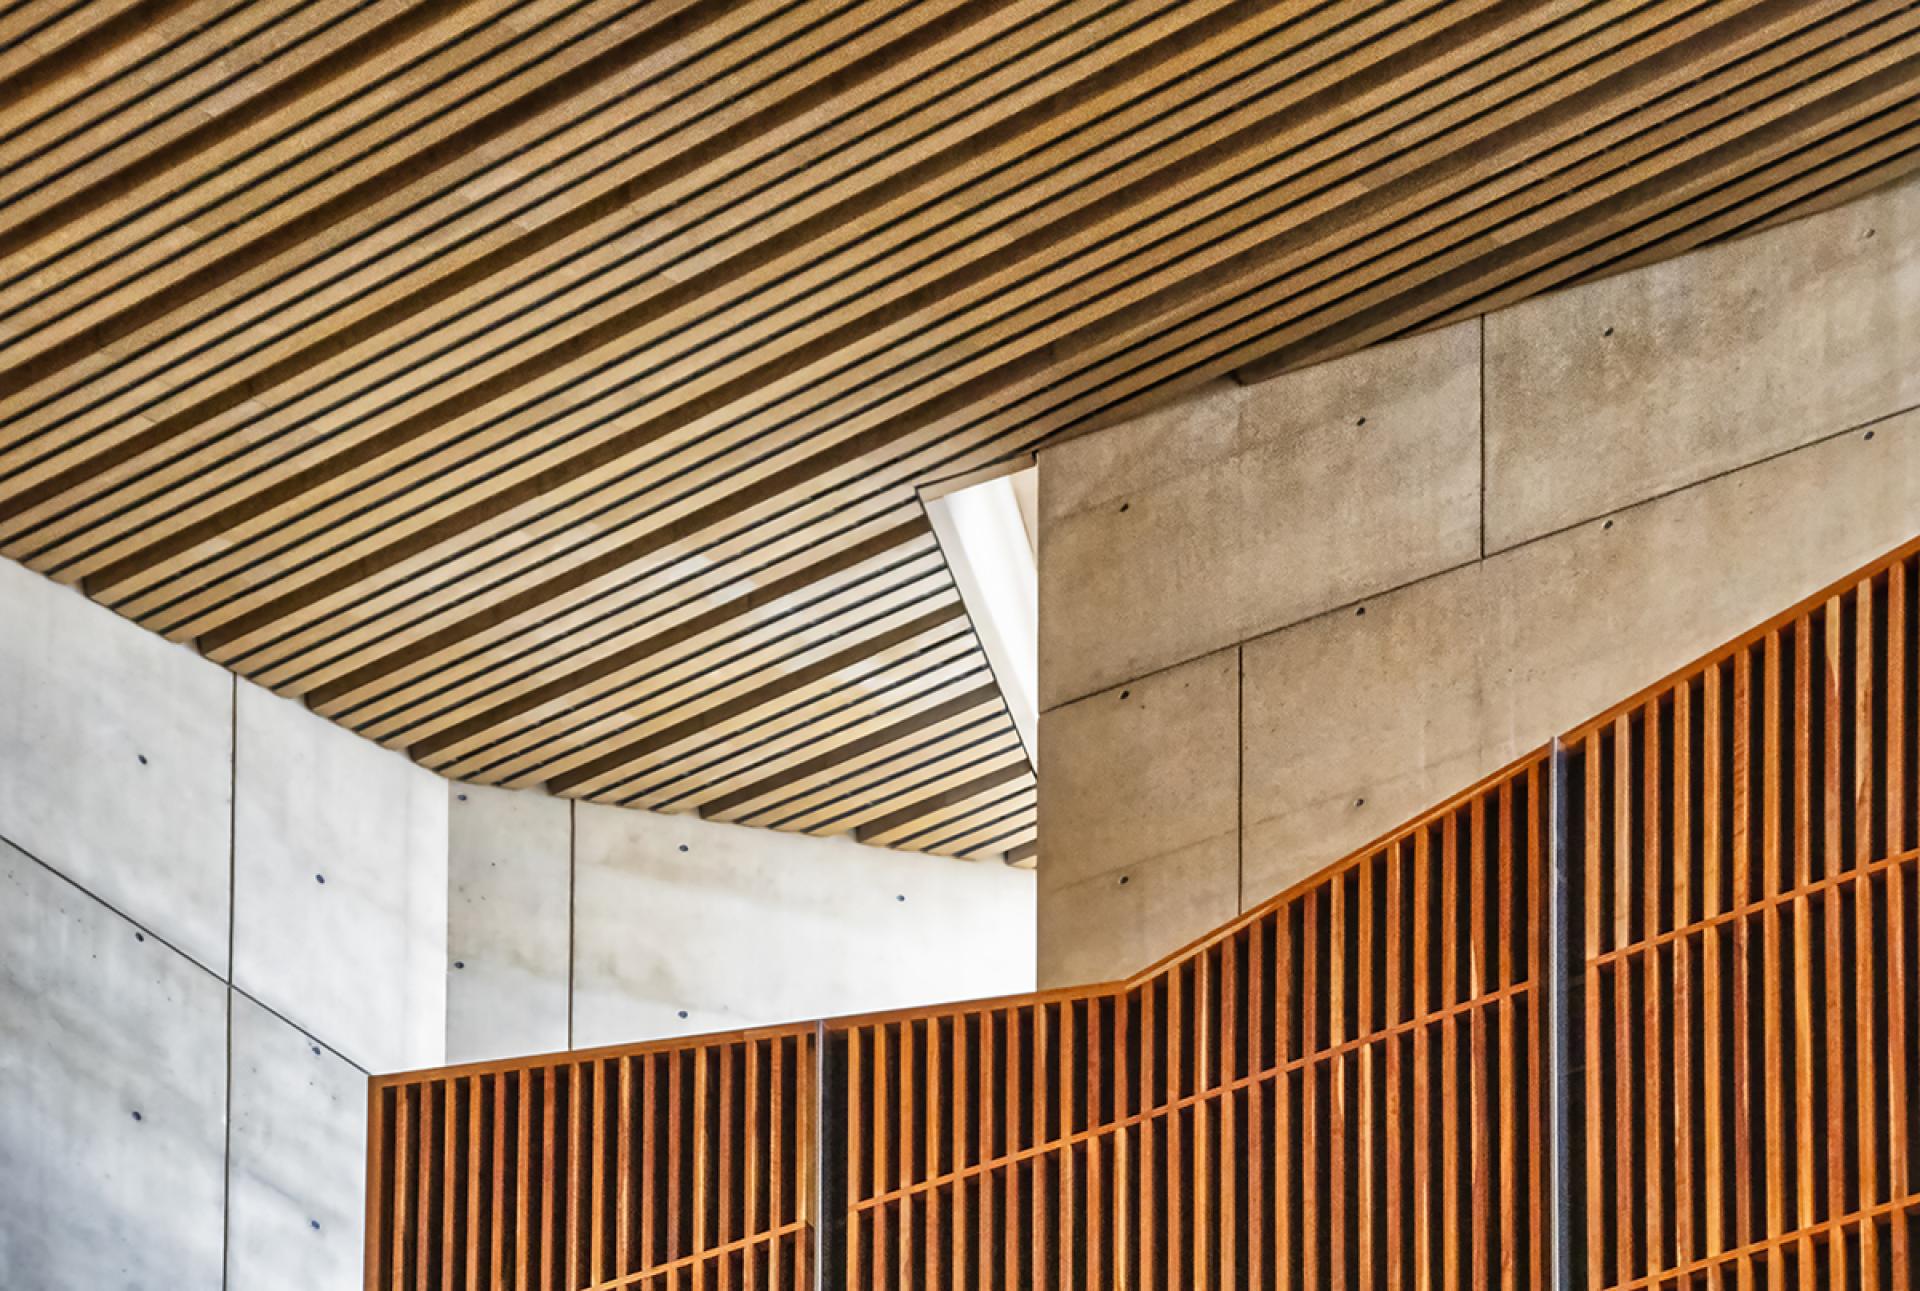 London Photography Awards Winner - Concrete and Wood